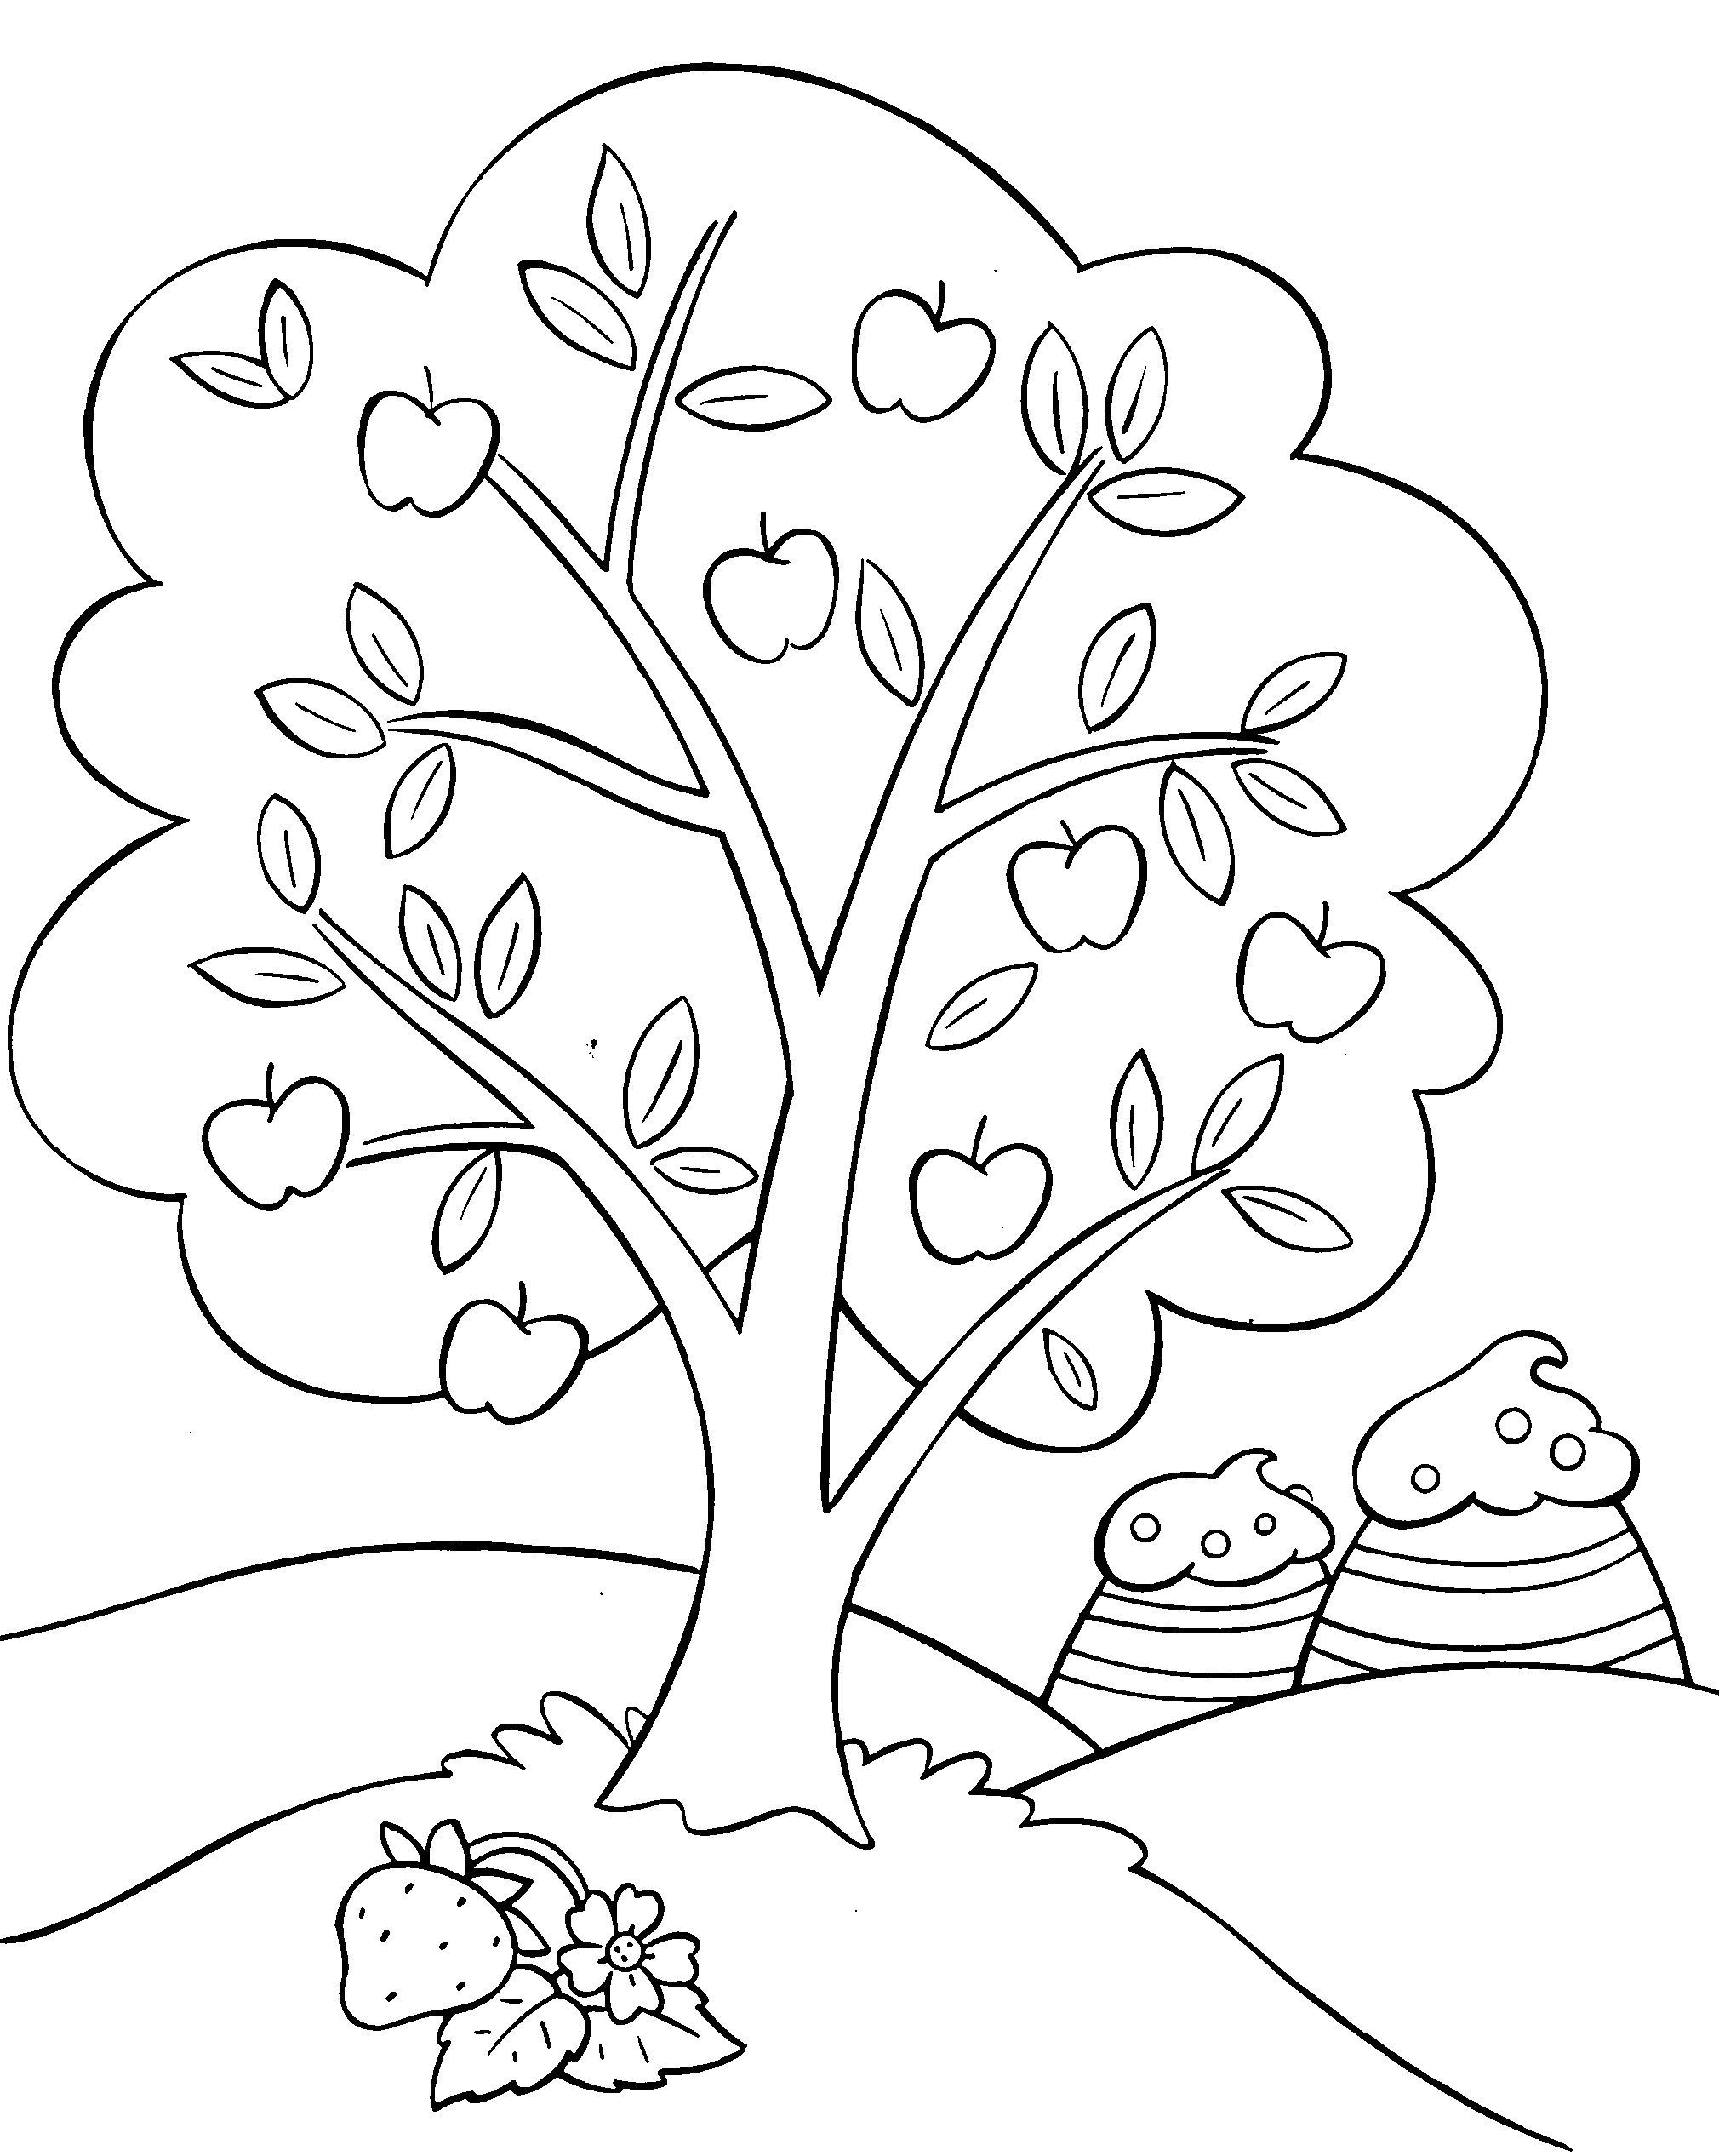 Online Coloring Picture 6